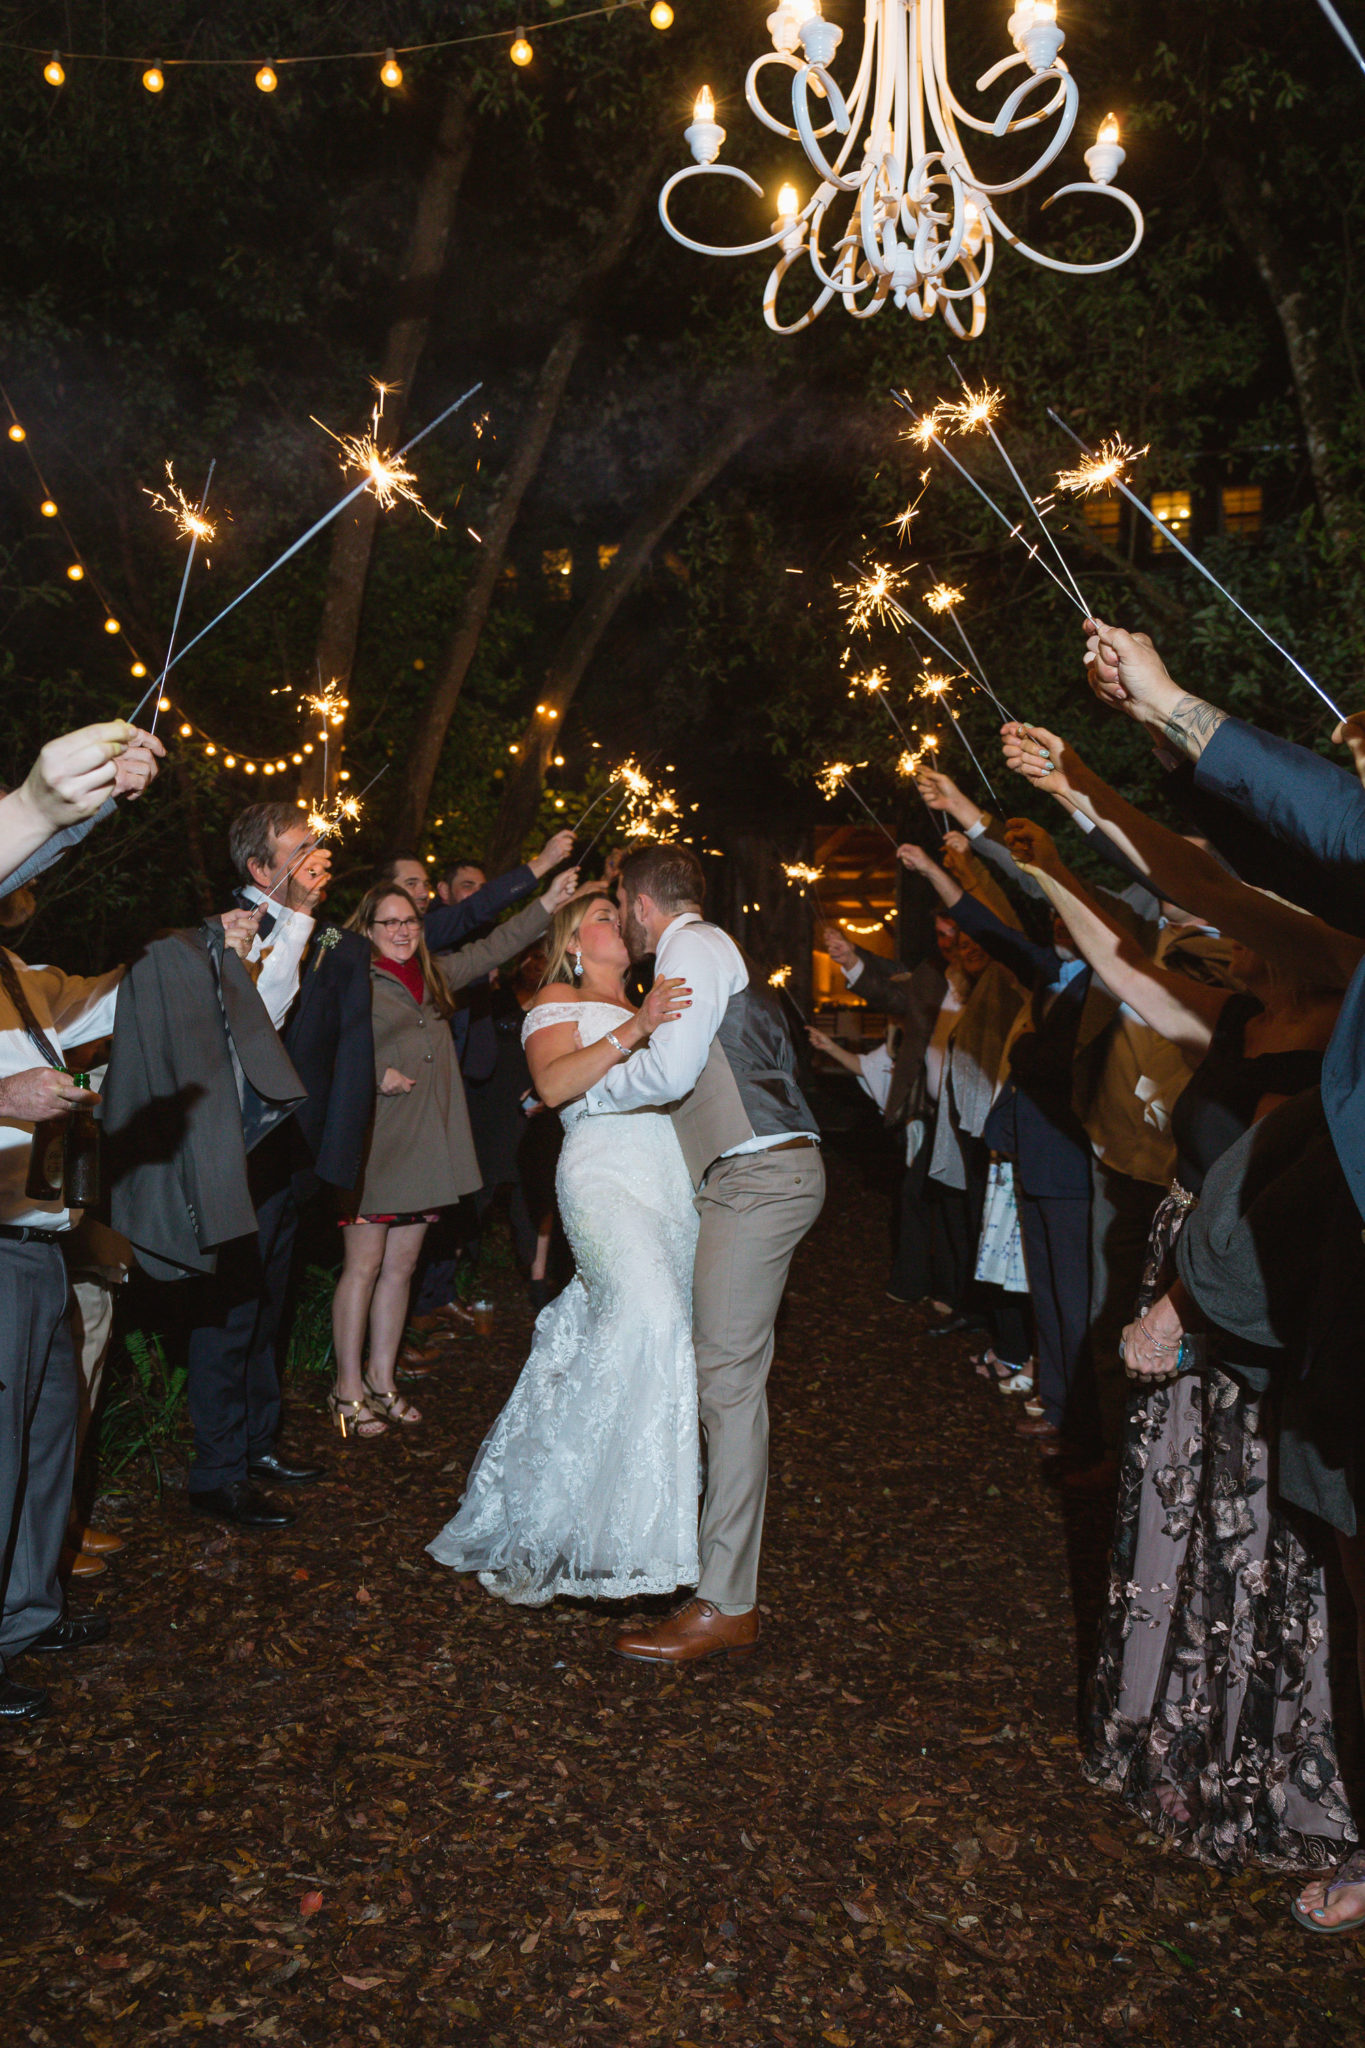 A super-fun sparkler exit for the couple at the end of the night.